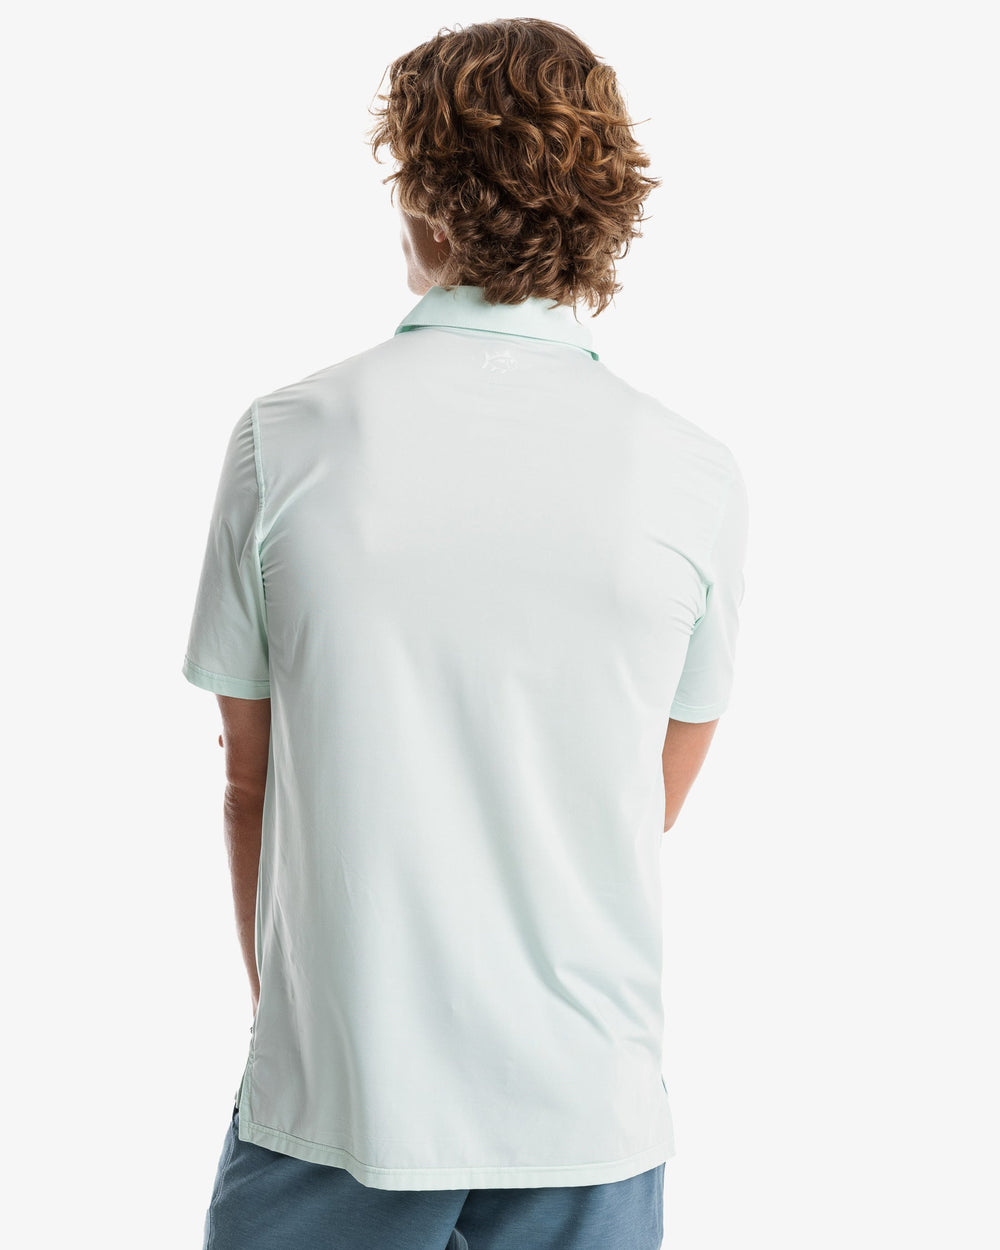 The model back view of the Men's Sawgrass Stripe brrr°®-eeze Performance Polo Shirt by Southern Tide - Mist Green